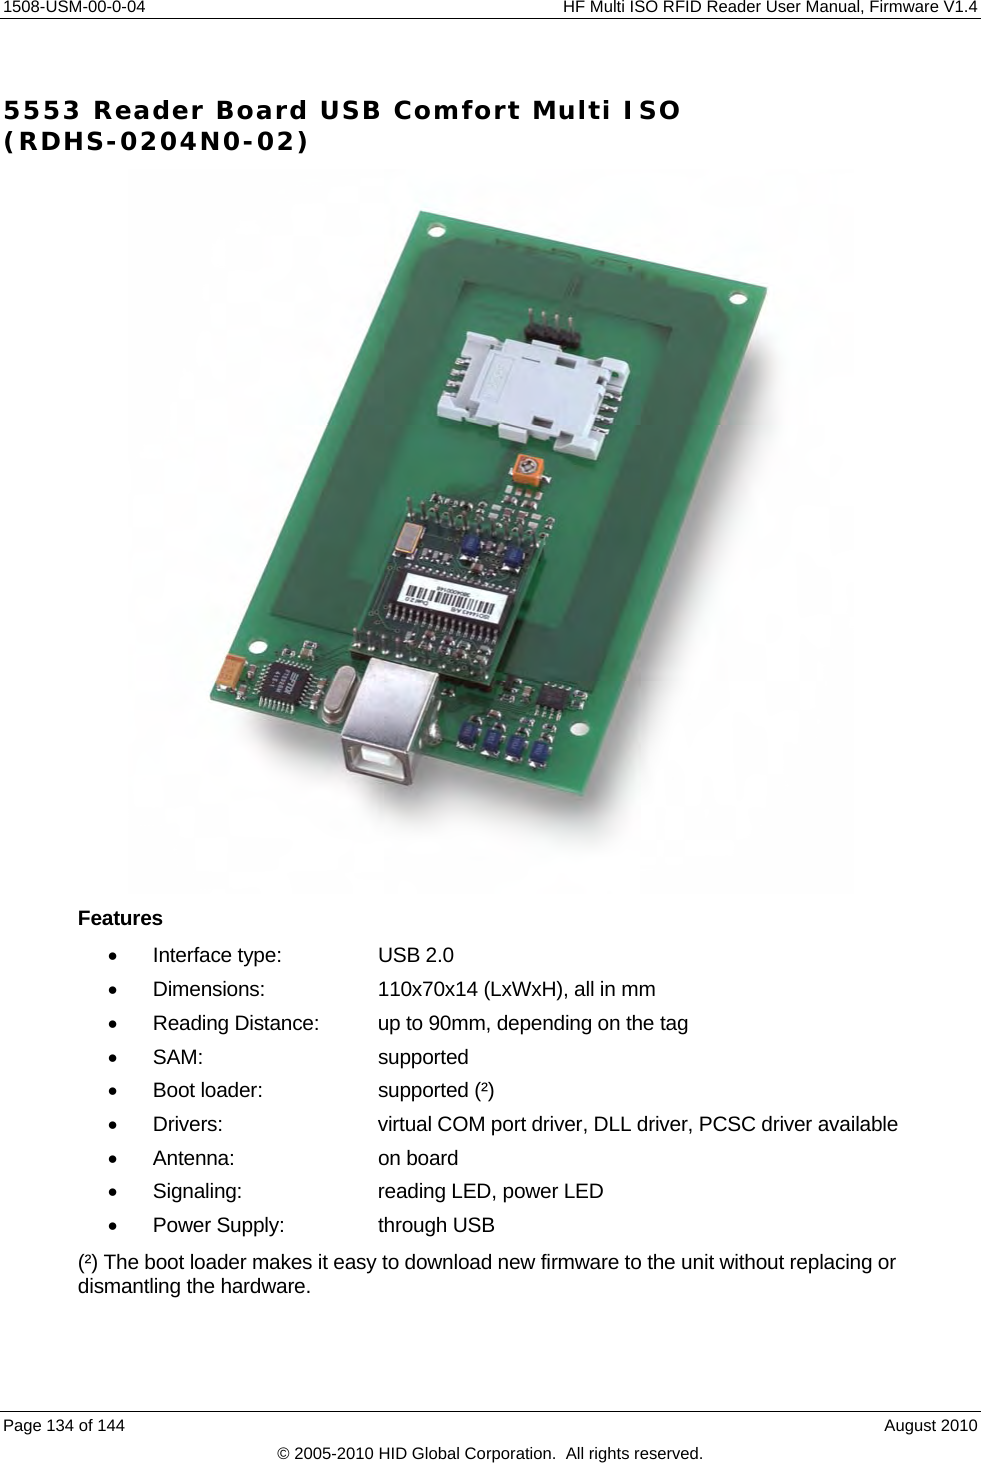     1508-USM-00-0-04    HF Multi ISO RFID Reader User Manual, Firmware V1.4 5553 Reader Board USB Comfort Multi ISO (RDHS-0204N0-02)  Features  Interface type:   USB 2.0   Dimensions:    110x70x14 (LxWxH), all in mm   Reading Distance:  up to 90mm, depending on the tag  SAM:   supported   Boot loader:    supported (²)   Drivers:     virtual COM port driver, DLL driver, PCSC driver available  Antenna:    on board   Signaling:    reading LED, power LED   Power Supply:    through USB (²) The boot loader makes it easy to download new firmware to the unit without replacing or dismantling the hardware. Page 134 of 144    August 2010 © 2005-2010 HID Global Corporation.  All rights reserved. 